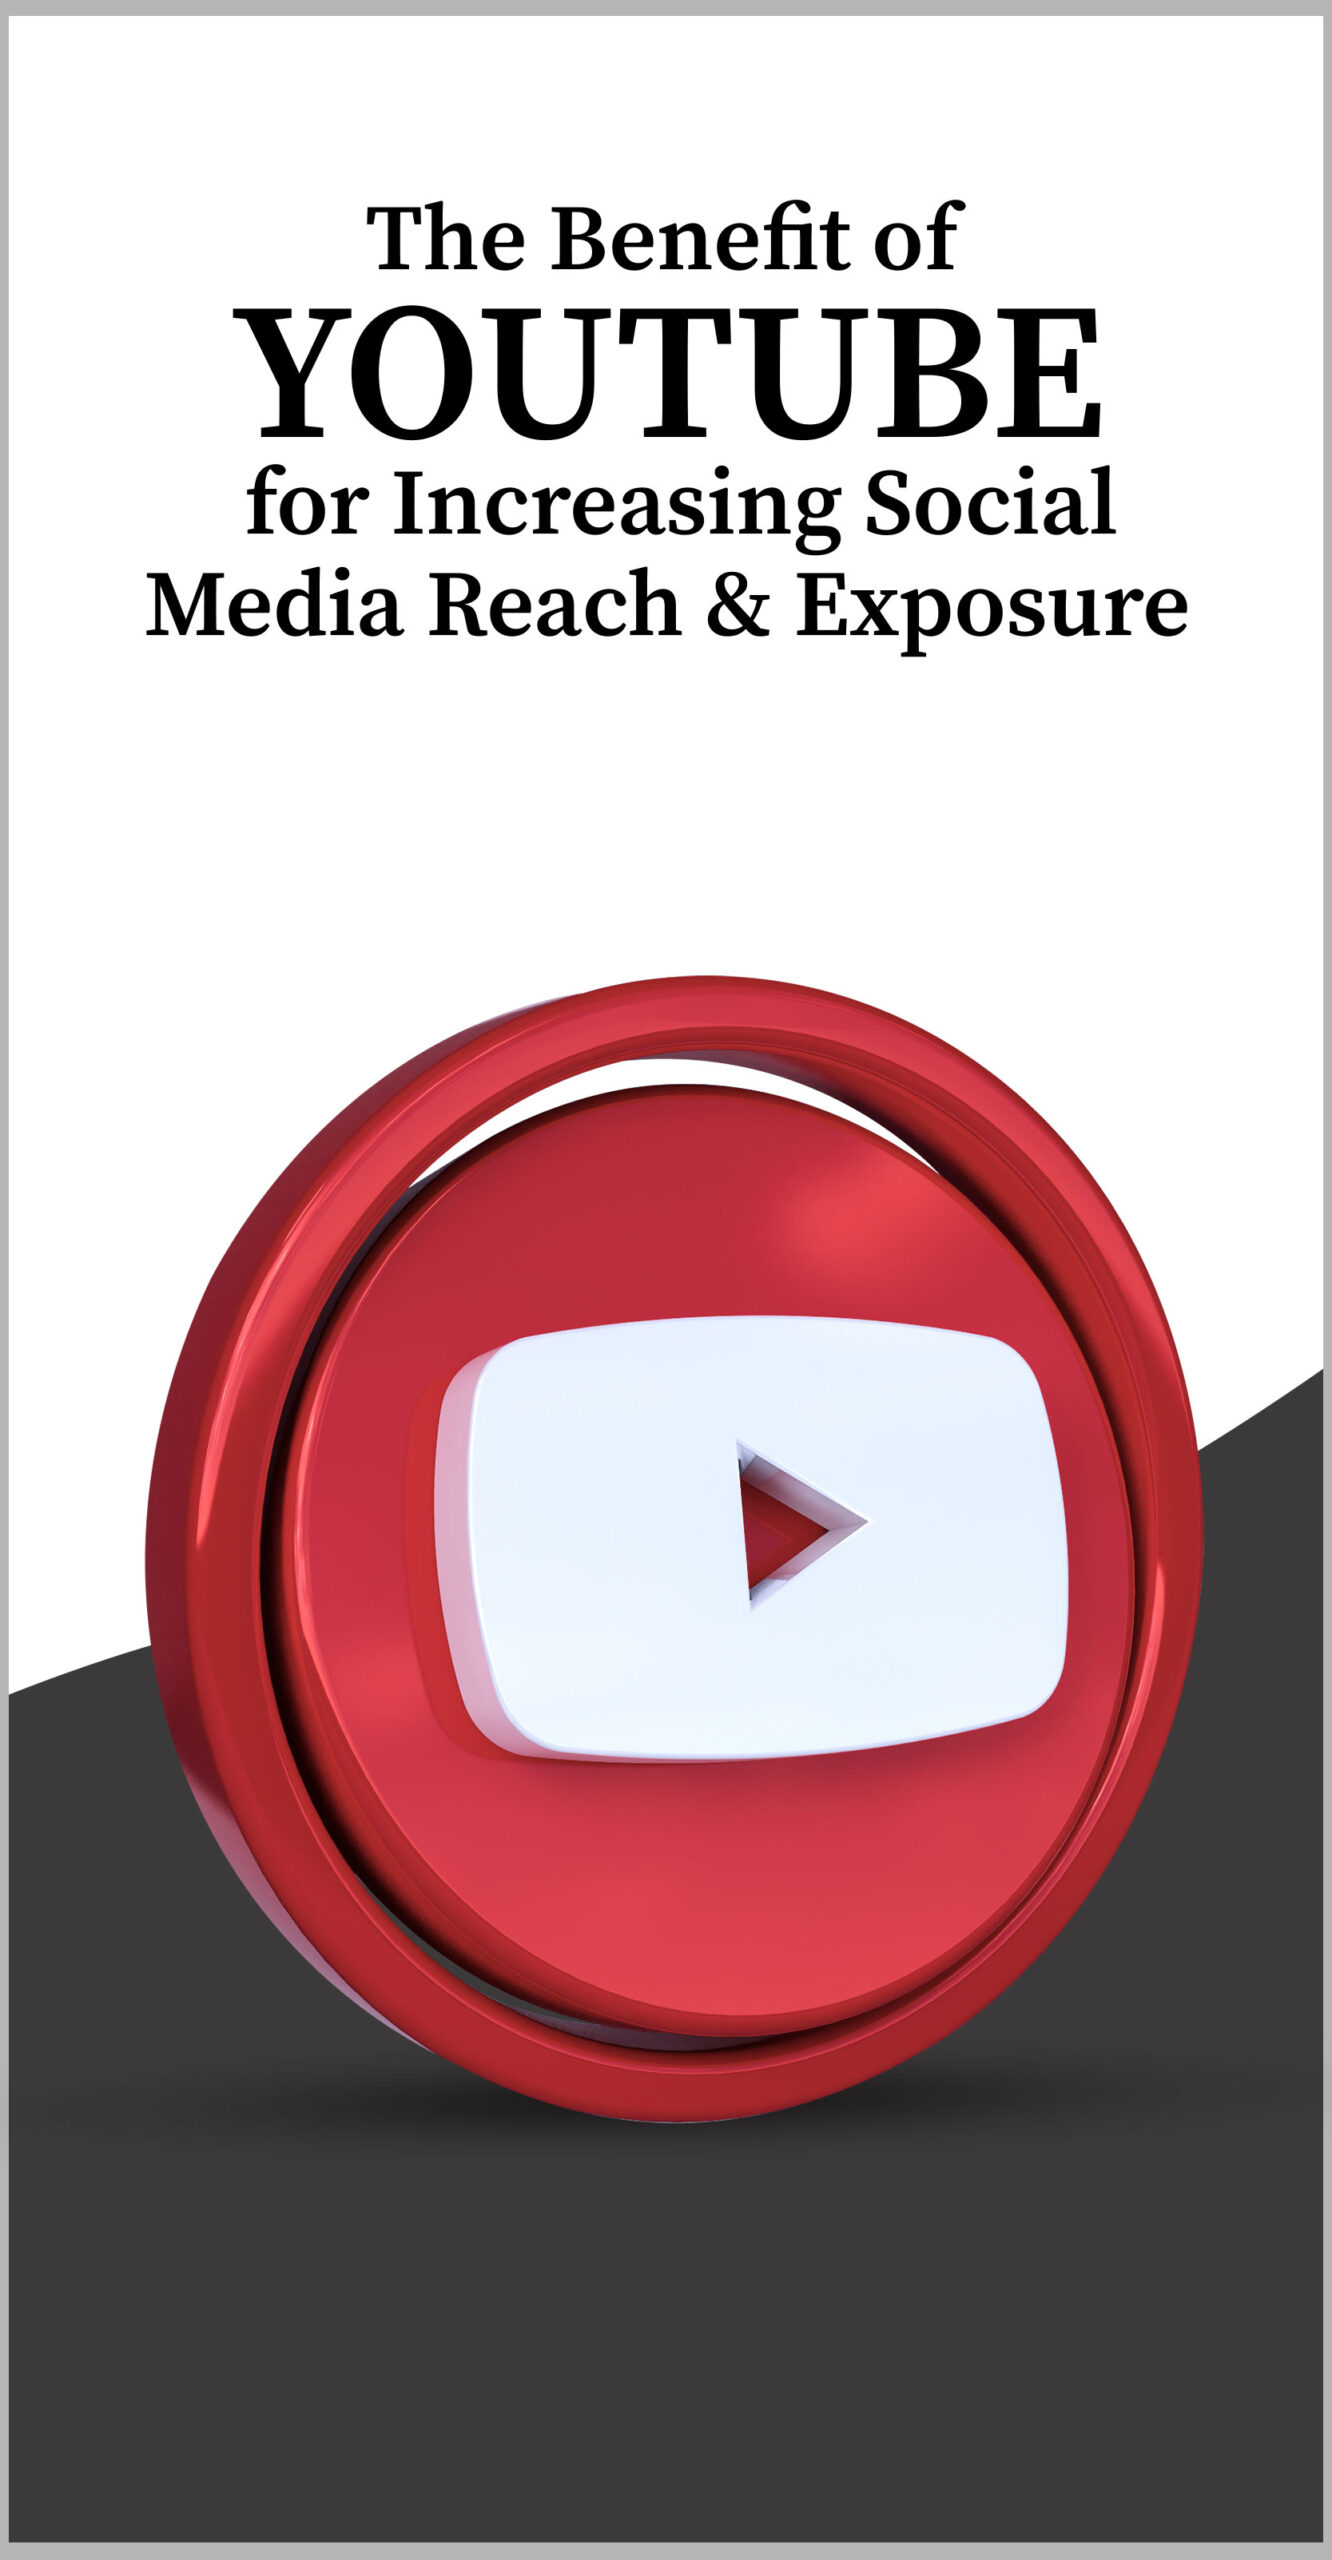 The benefit of YouTube for increasing Social media reach and exposure